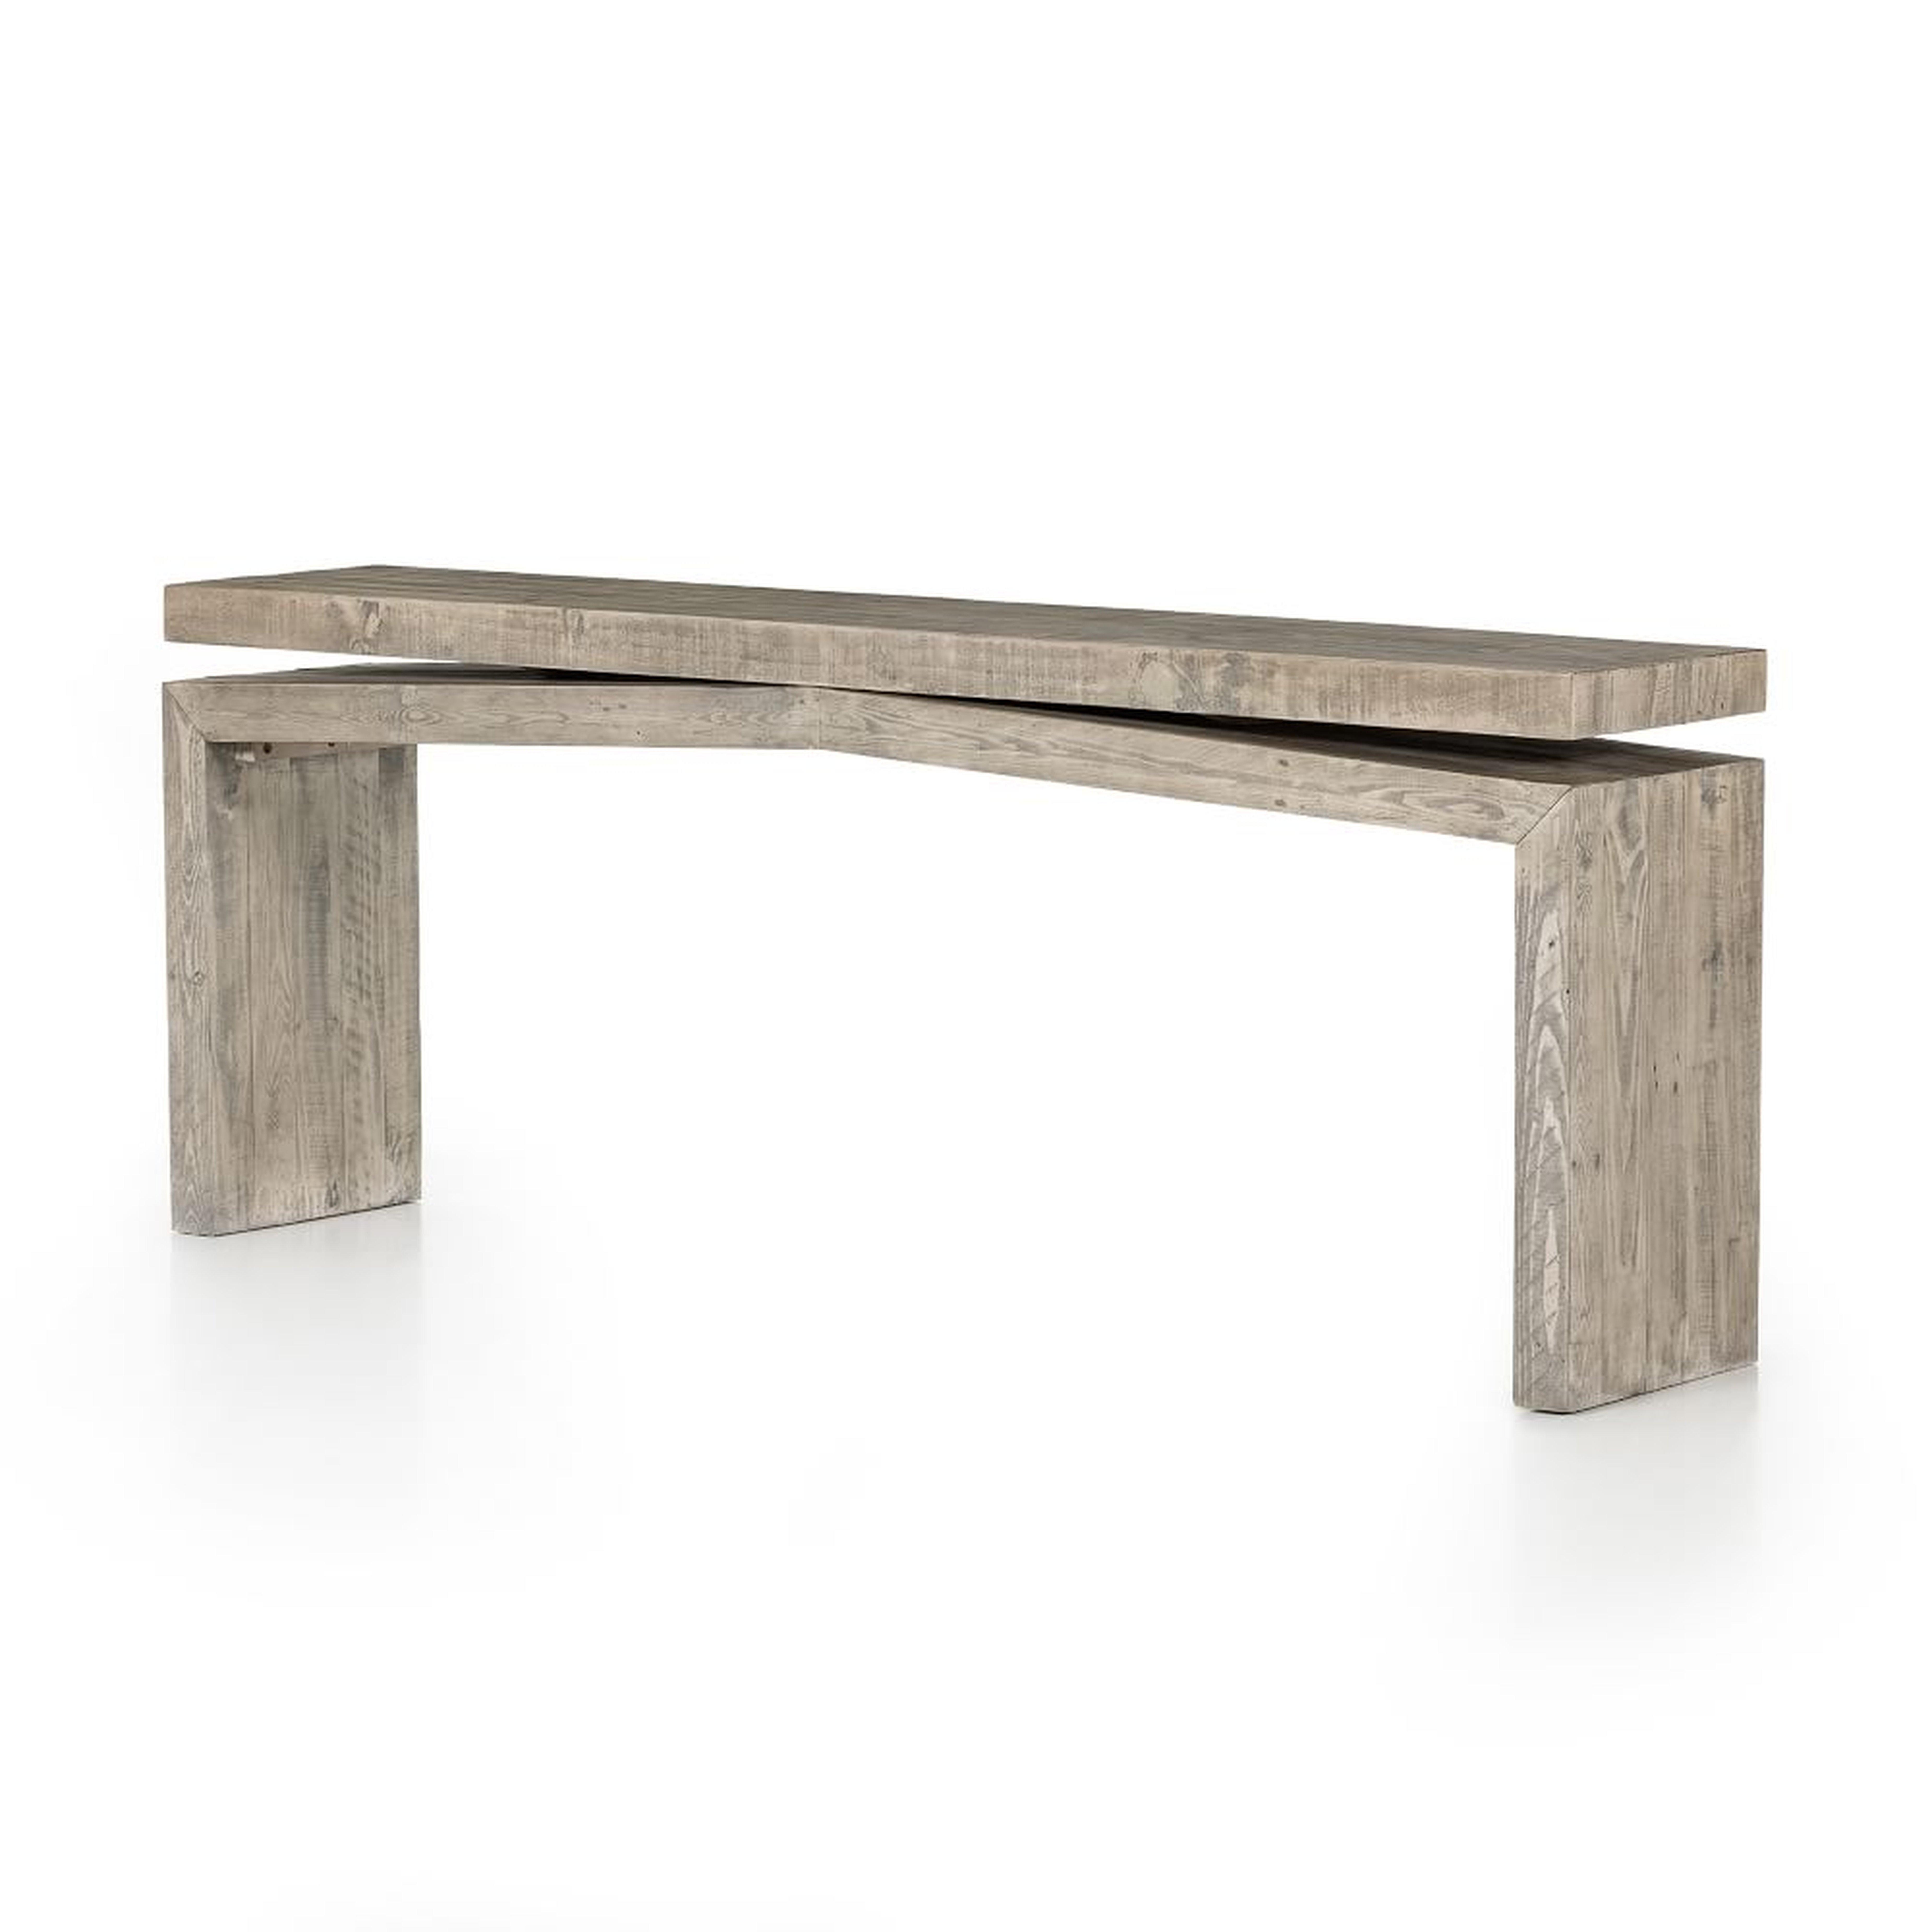 Matthes 78.75" Console Table, Weathered Wheat - West Elm